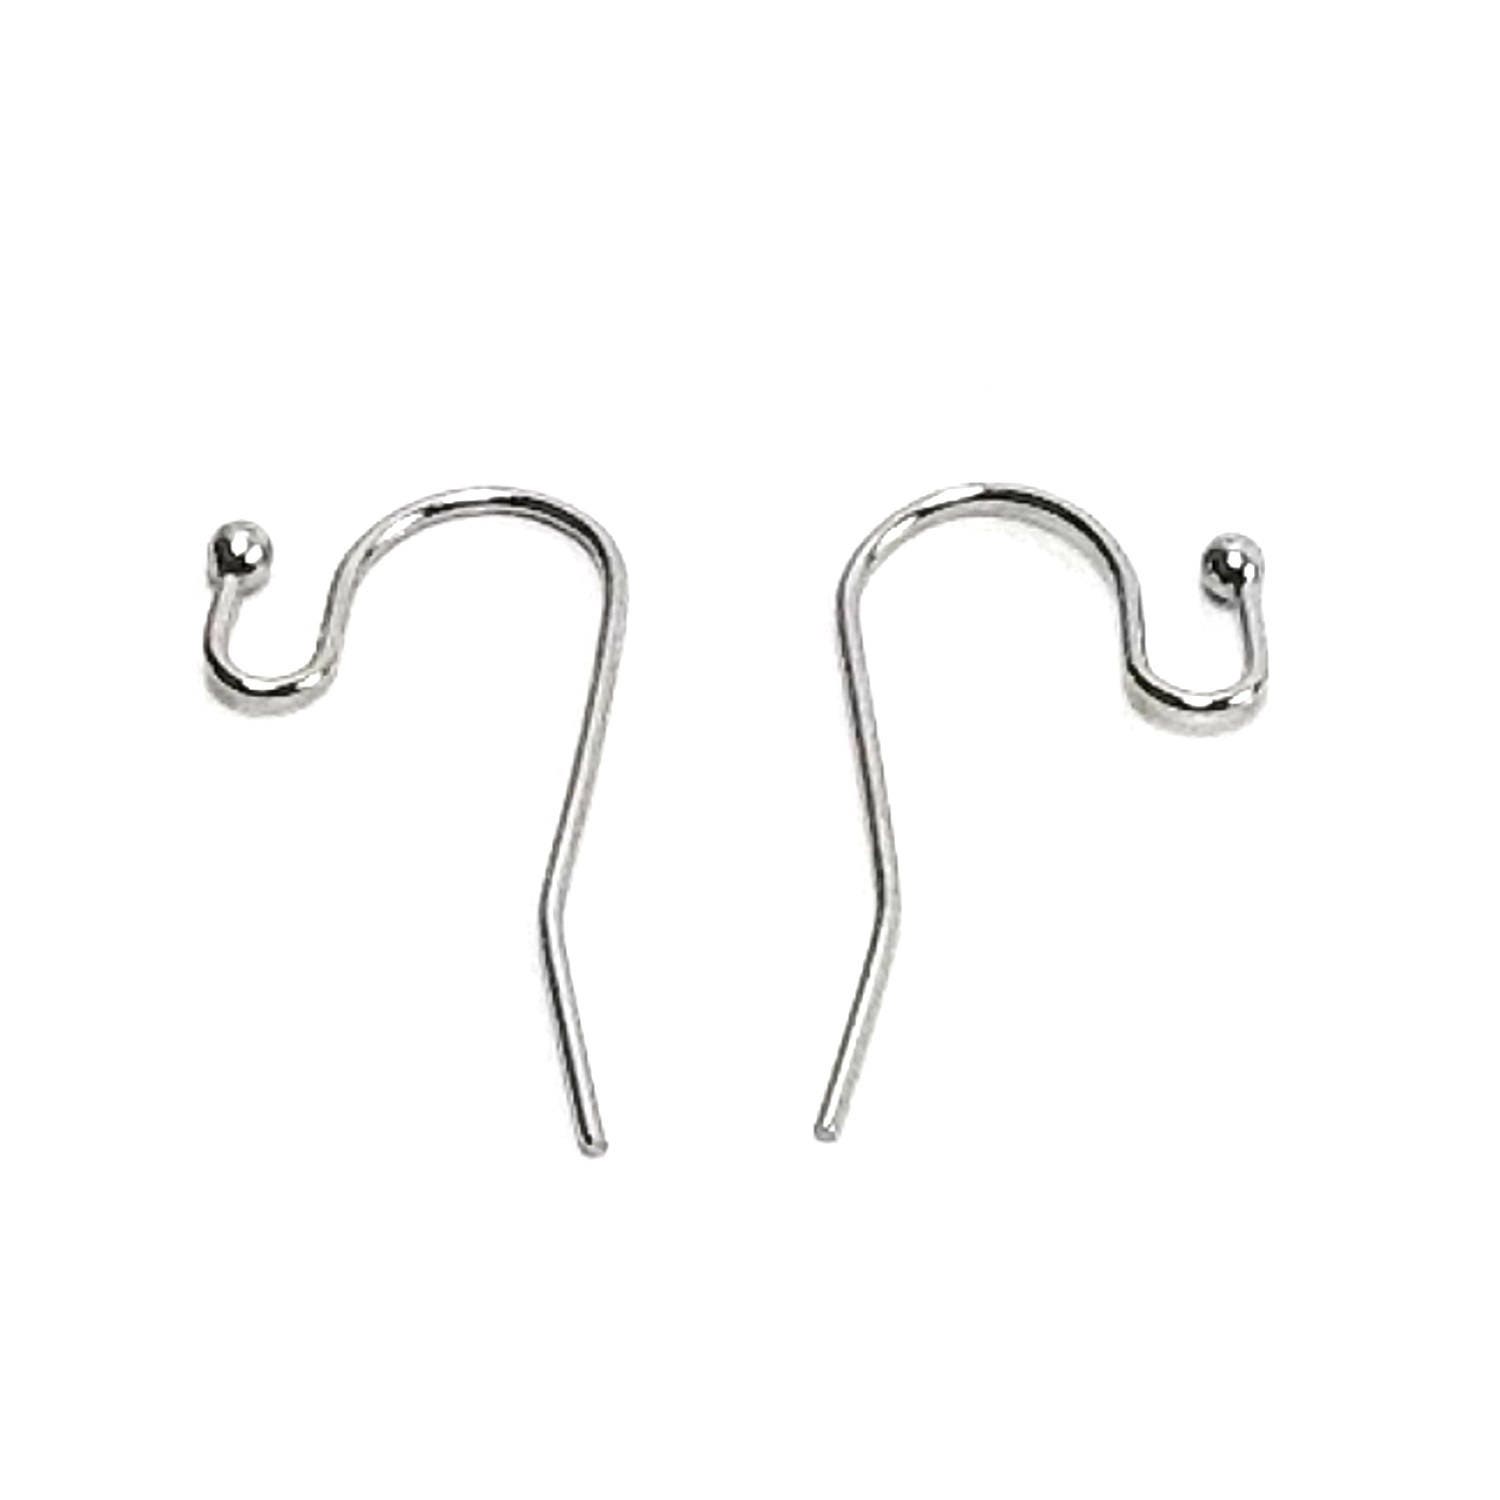 50,100,150,200 pieces Rhodium Ear Wires,French Fishhook Earring Wires with  2mm End Ball,Ear Wires with Ball Stopper Earring Components